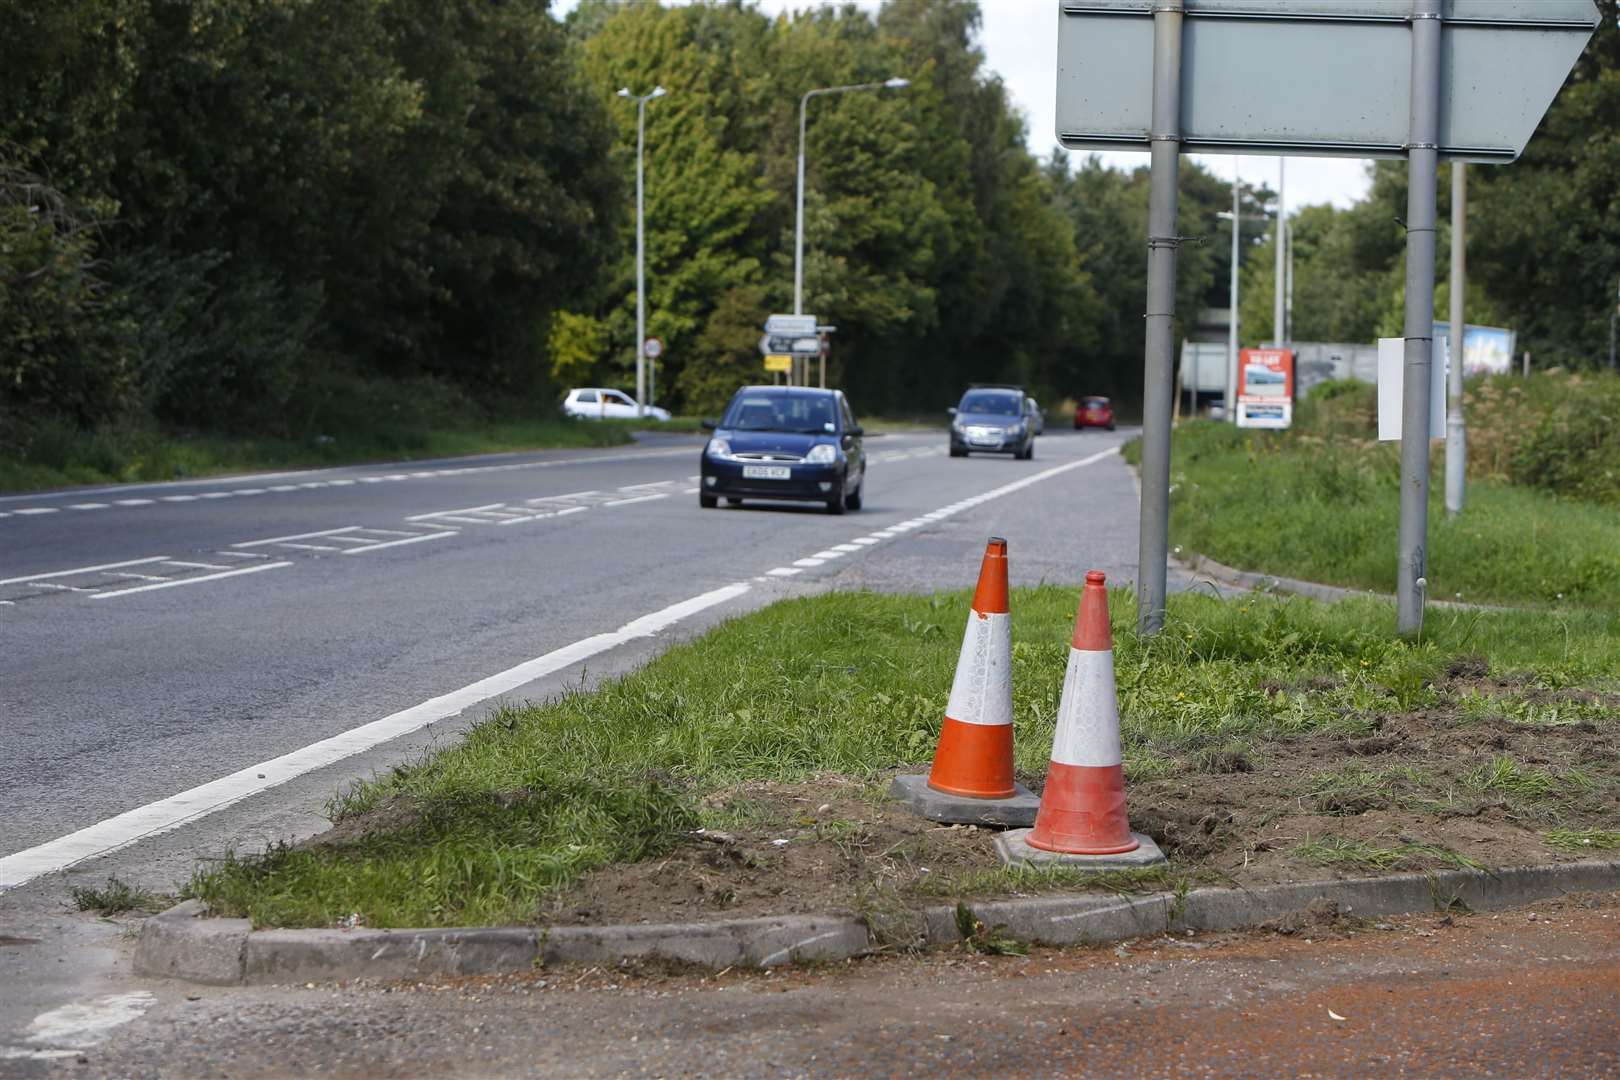 The scene of the crash on the A228 Snodland bypass